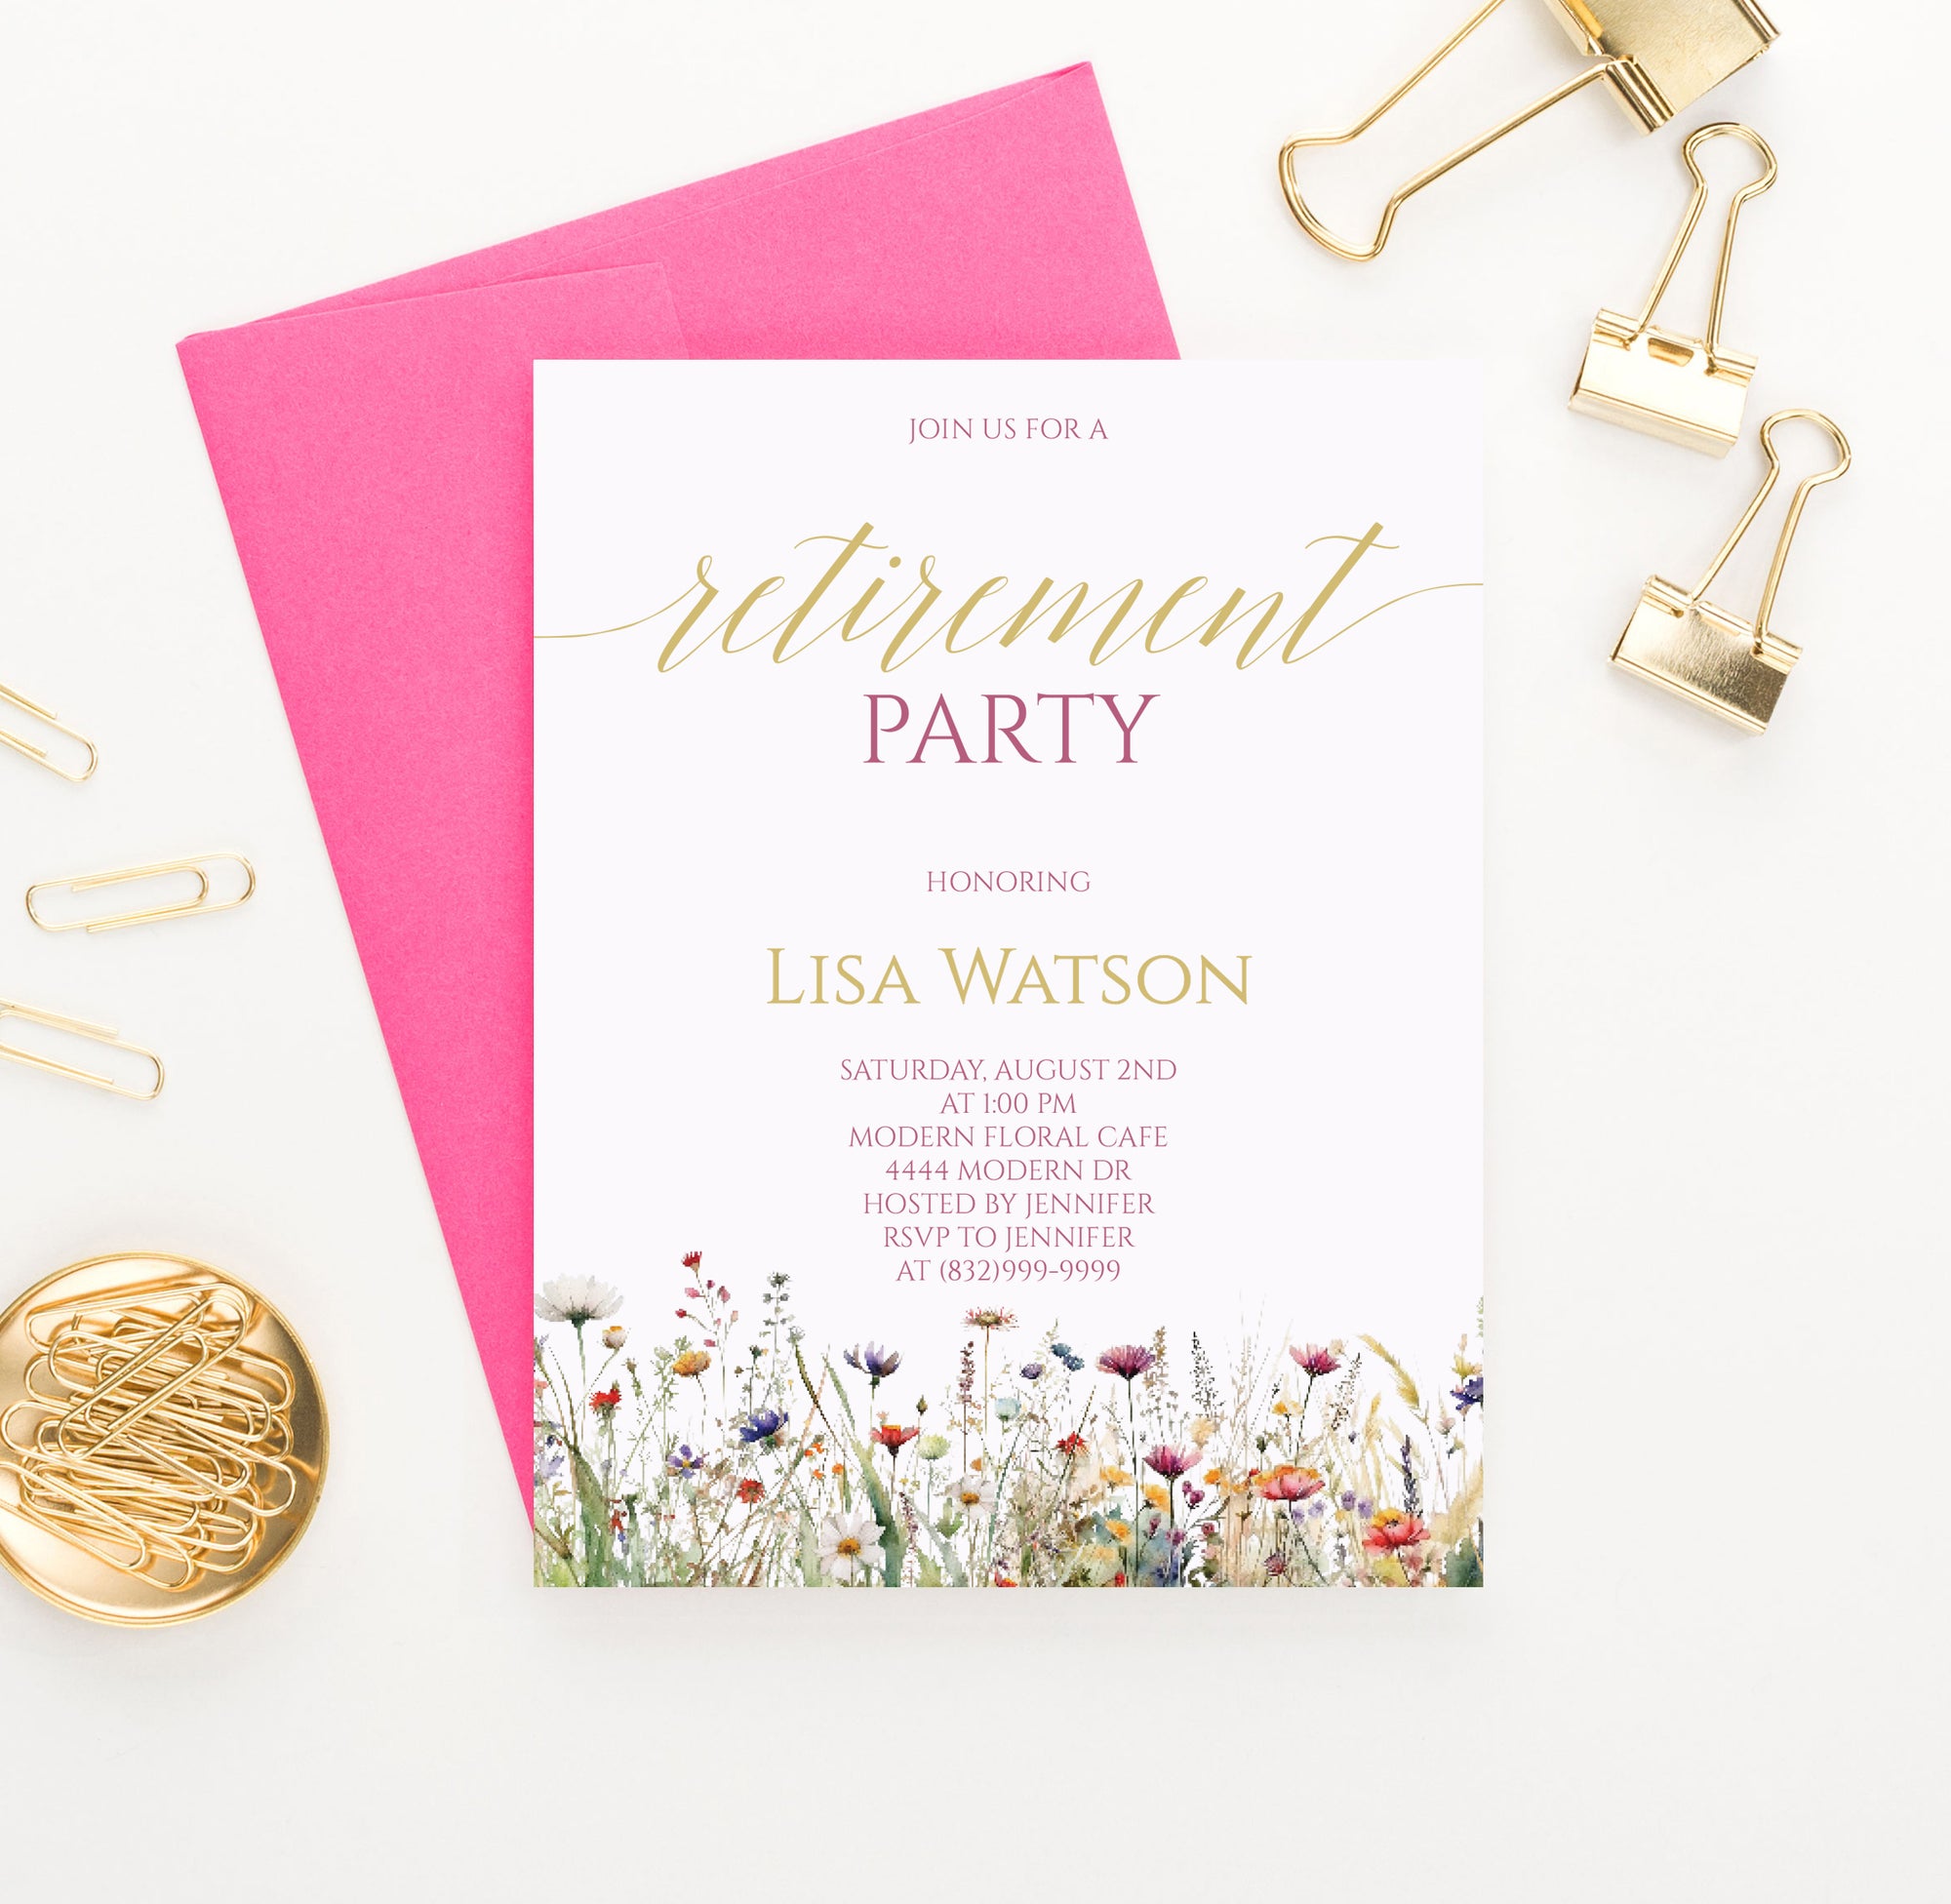 Custom Retirement Party Invitations With Wildflowers